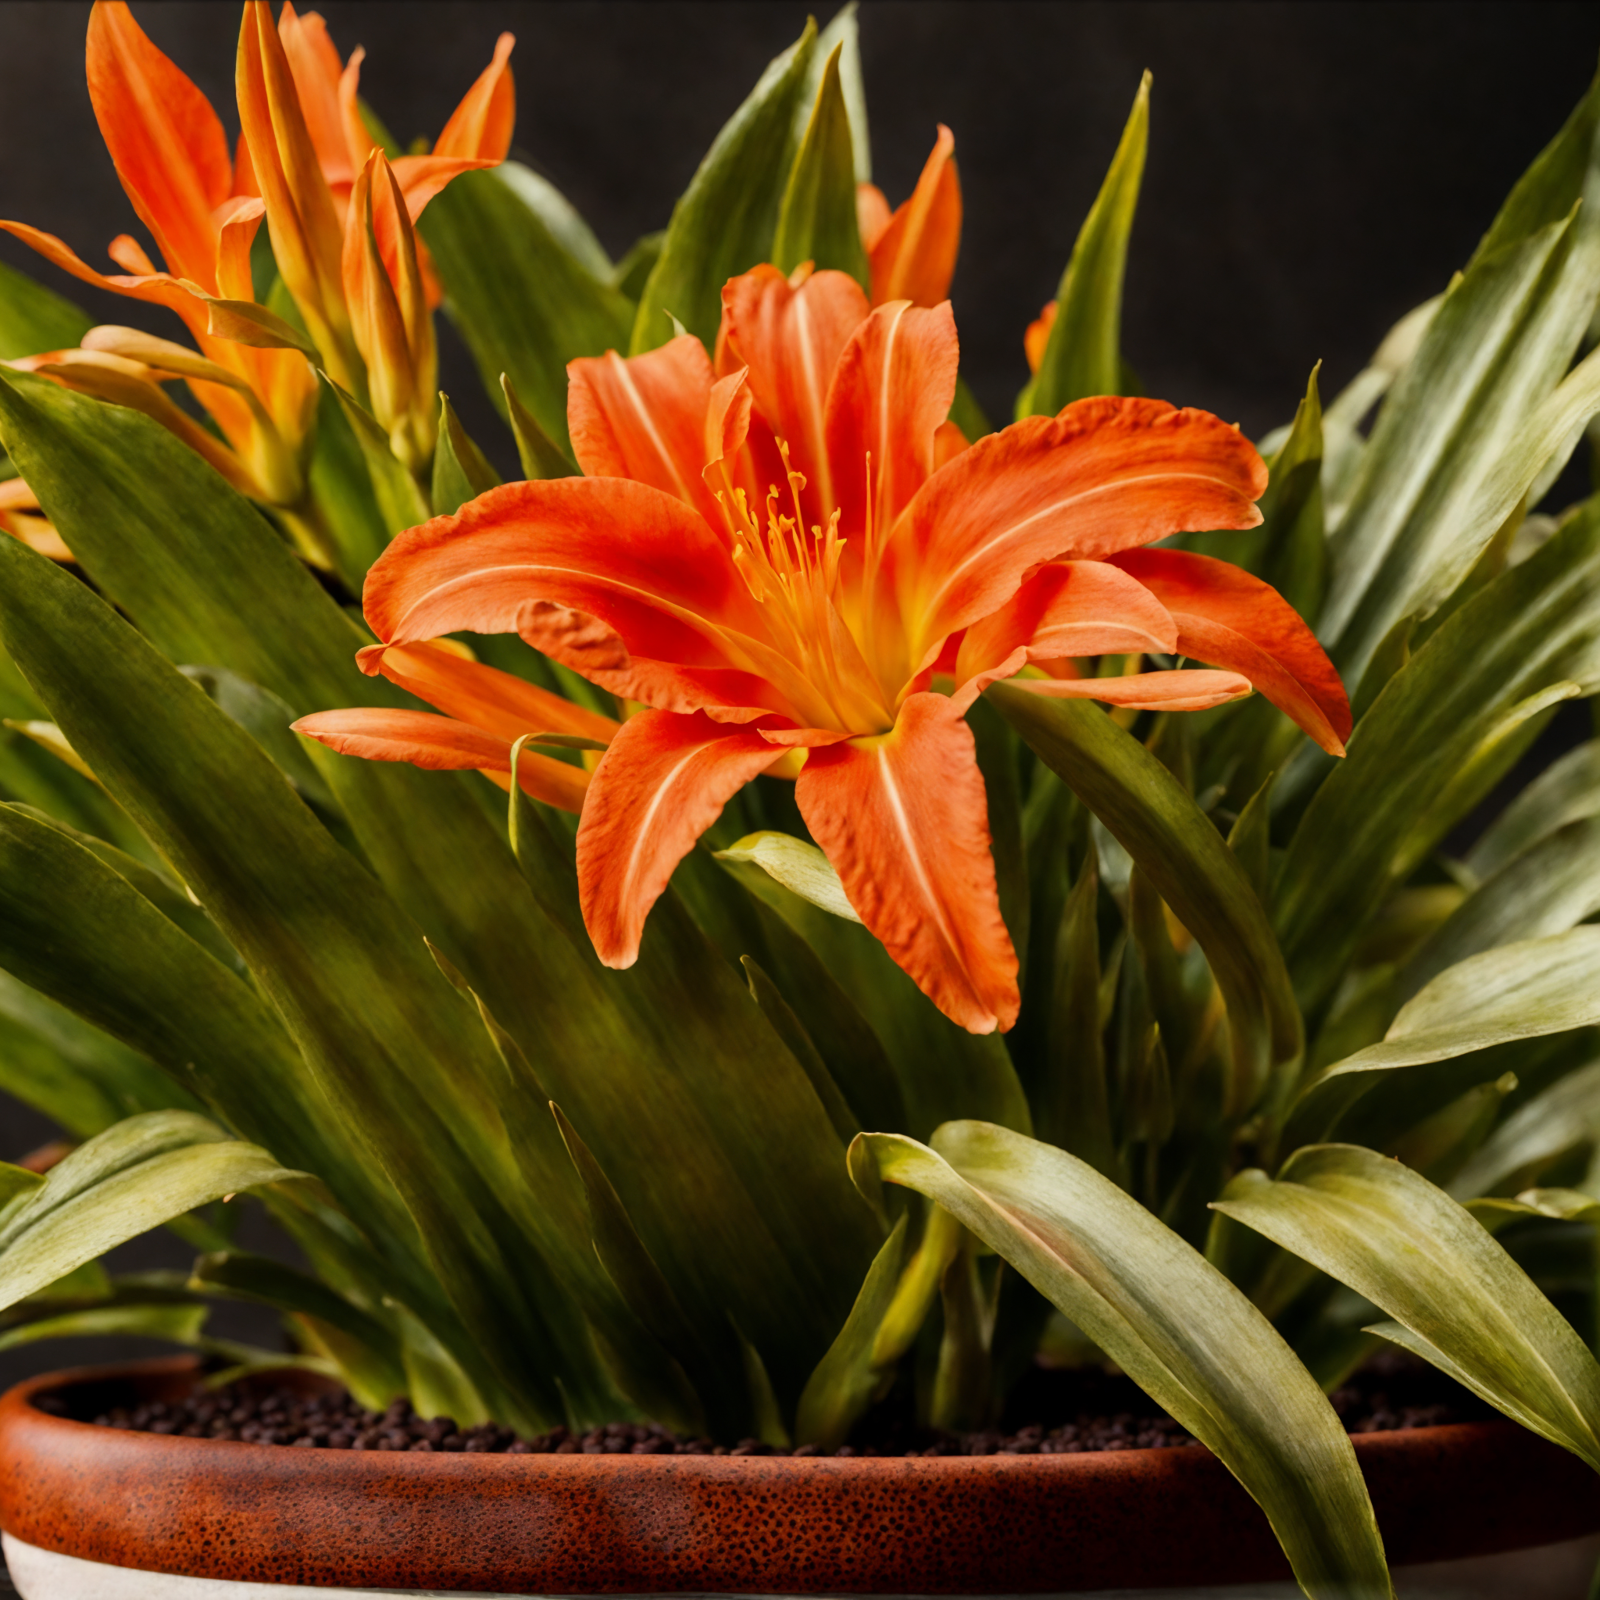 Vibrant Hemerocallis fulva flowers in a bowl, with clear lighting against a dark background.